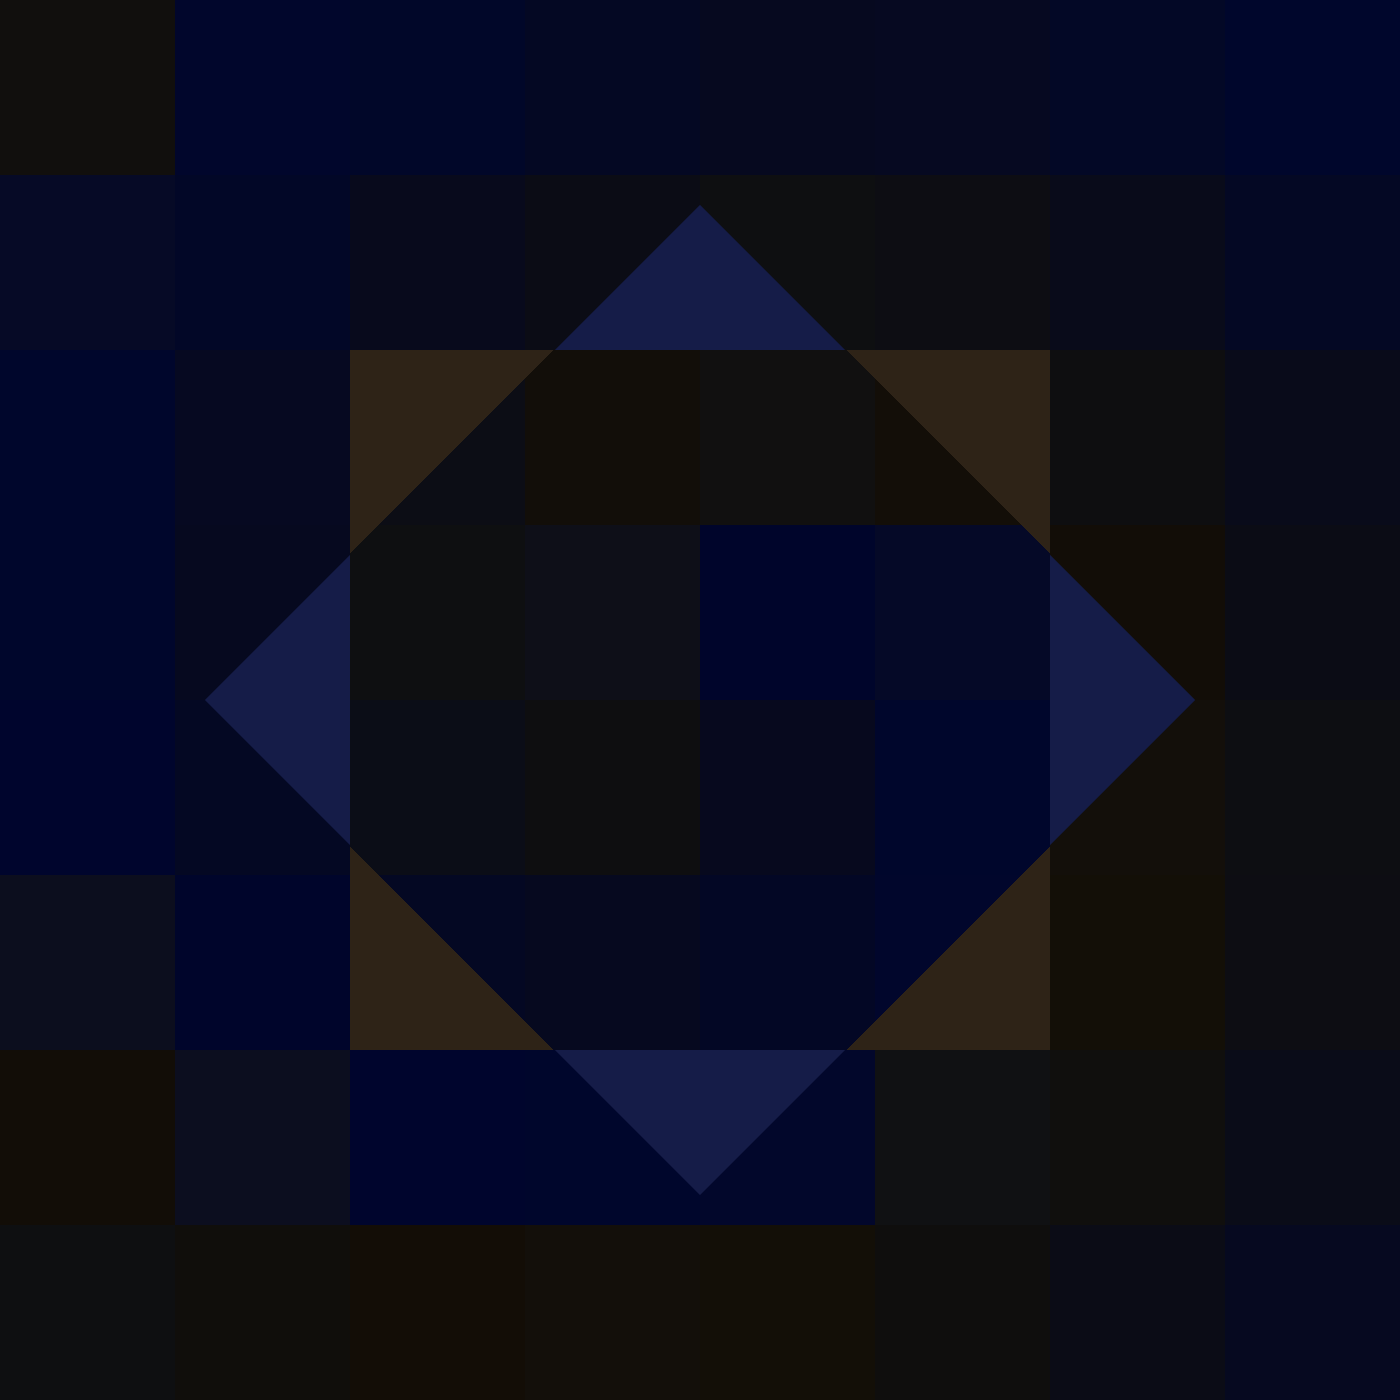 Album cover for 'Horromons', depicting an eight-pointed star with alternating dark blue and dark brown points, on a dark background